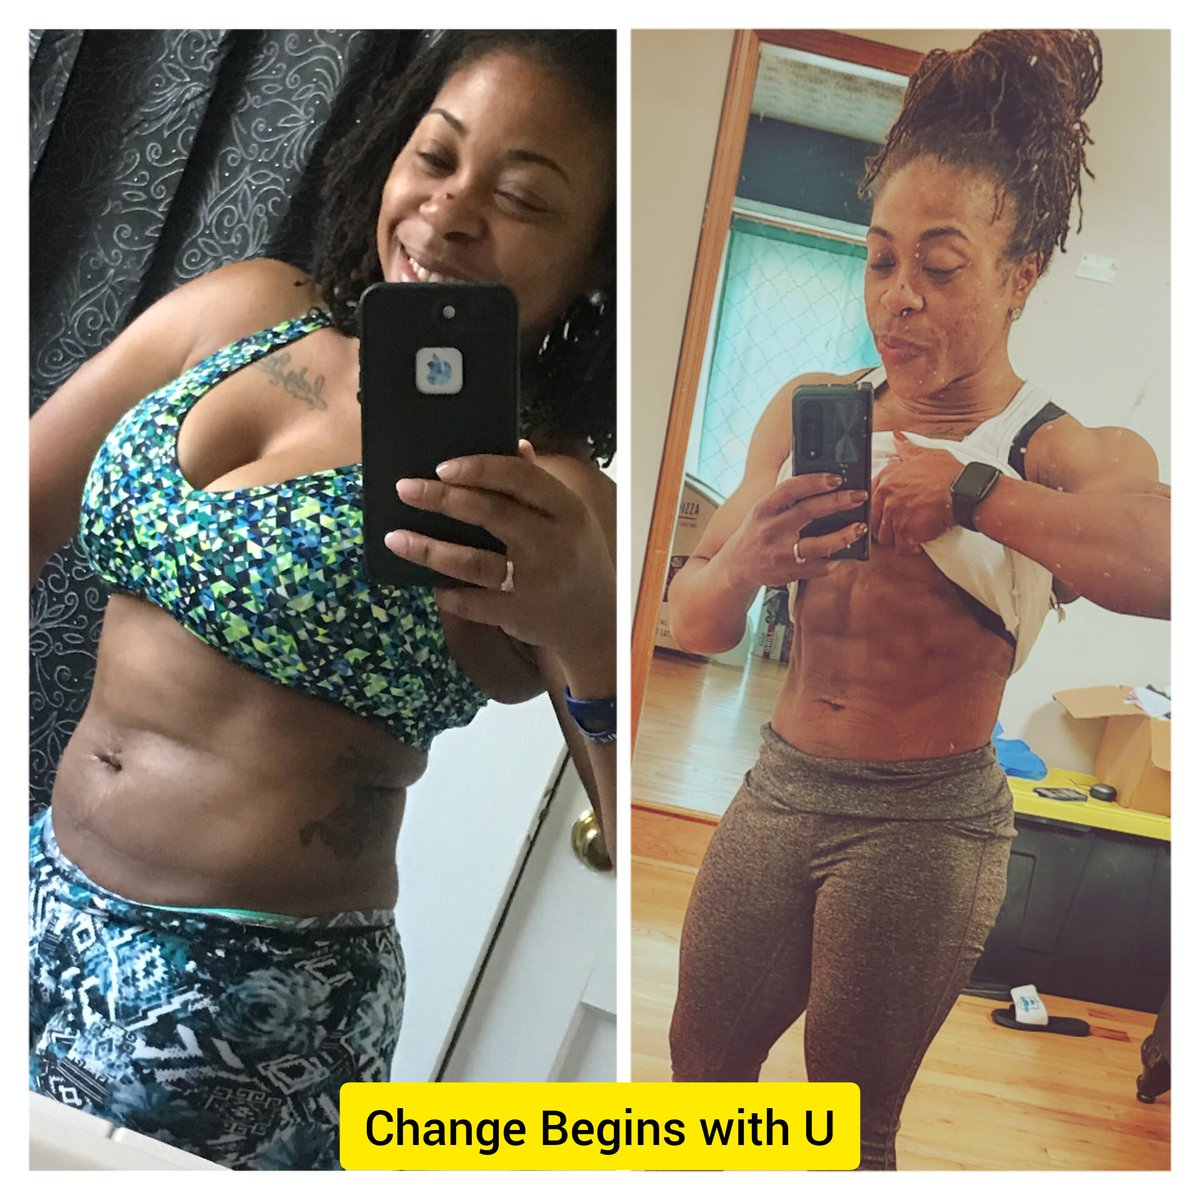 I am a product of hard work, consistency, discipline, and mindset shift. We all had to start somewhere. But where we end up is on us! #UncoveringTheNewU #TransformationThursday #Fitness #ChangeBeginsWithU #weightlossjourney #onlinefitnesscoach #Letswork #itspossible